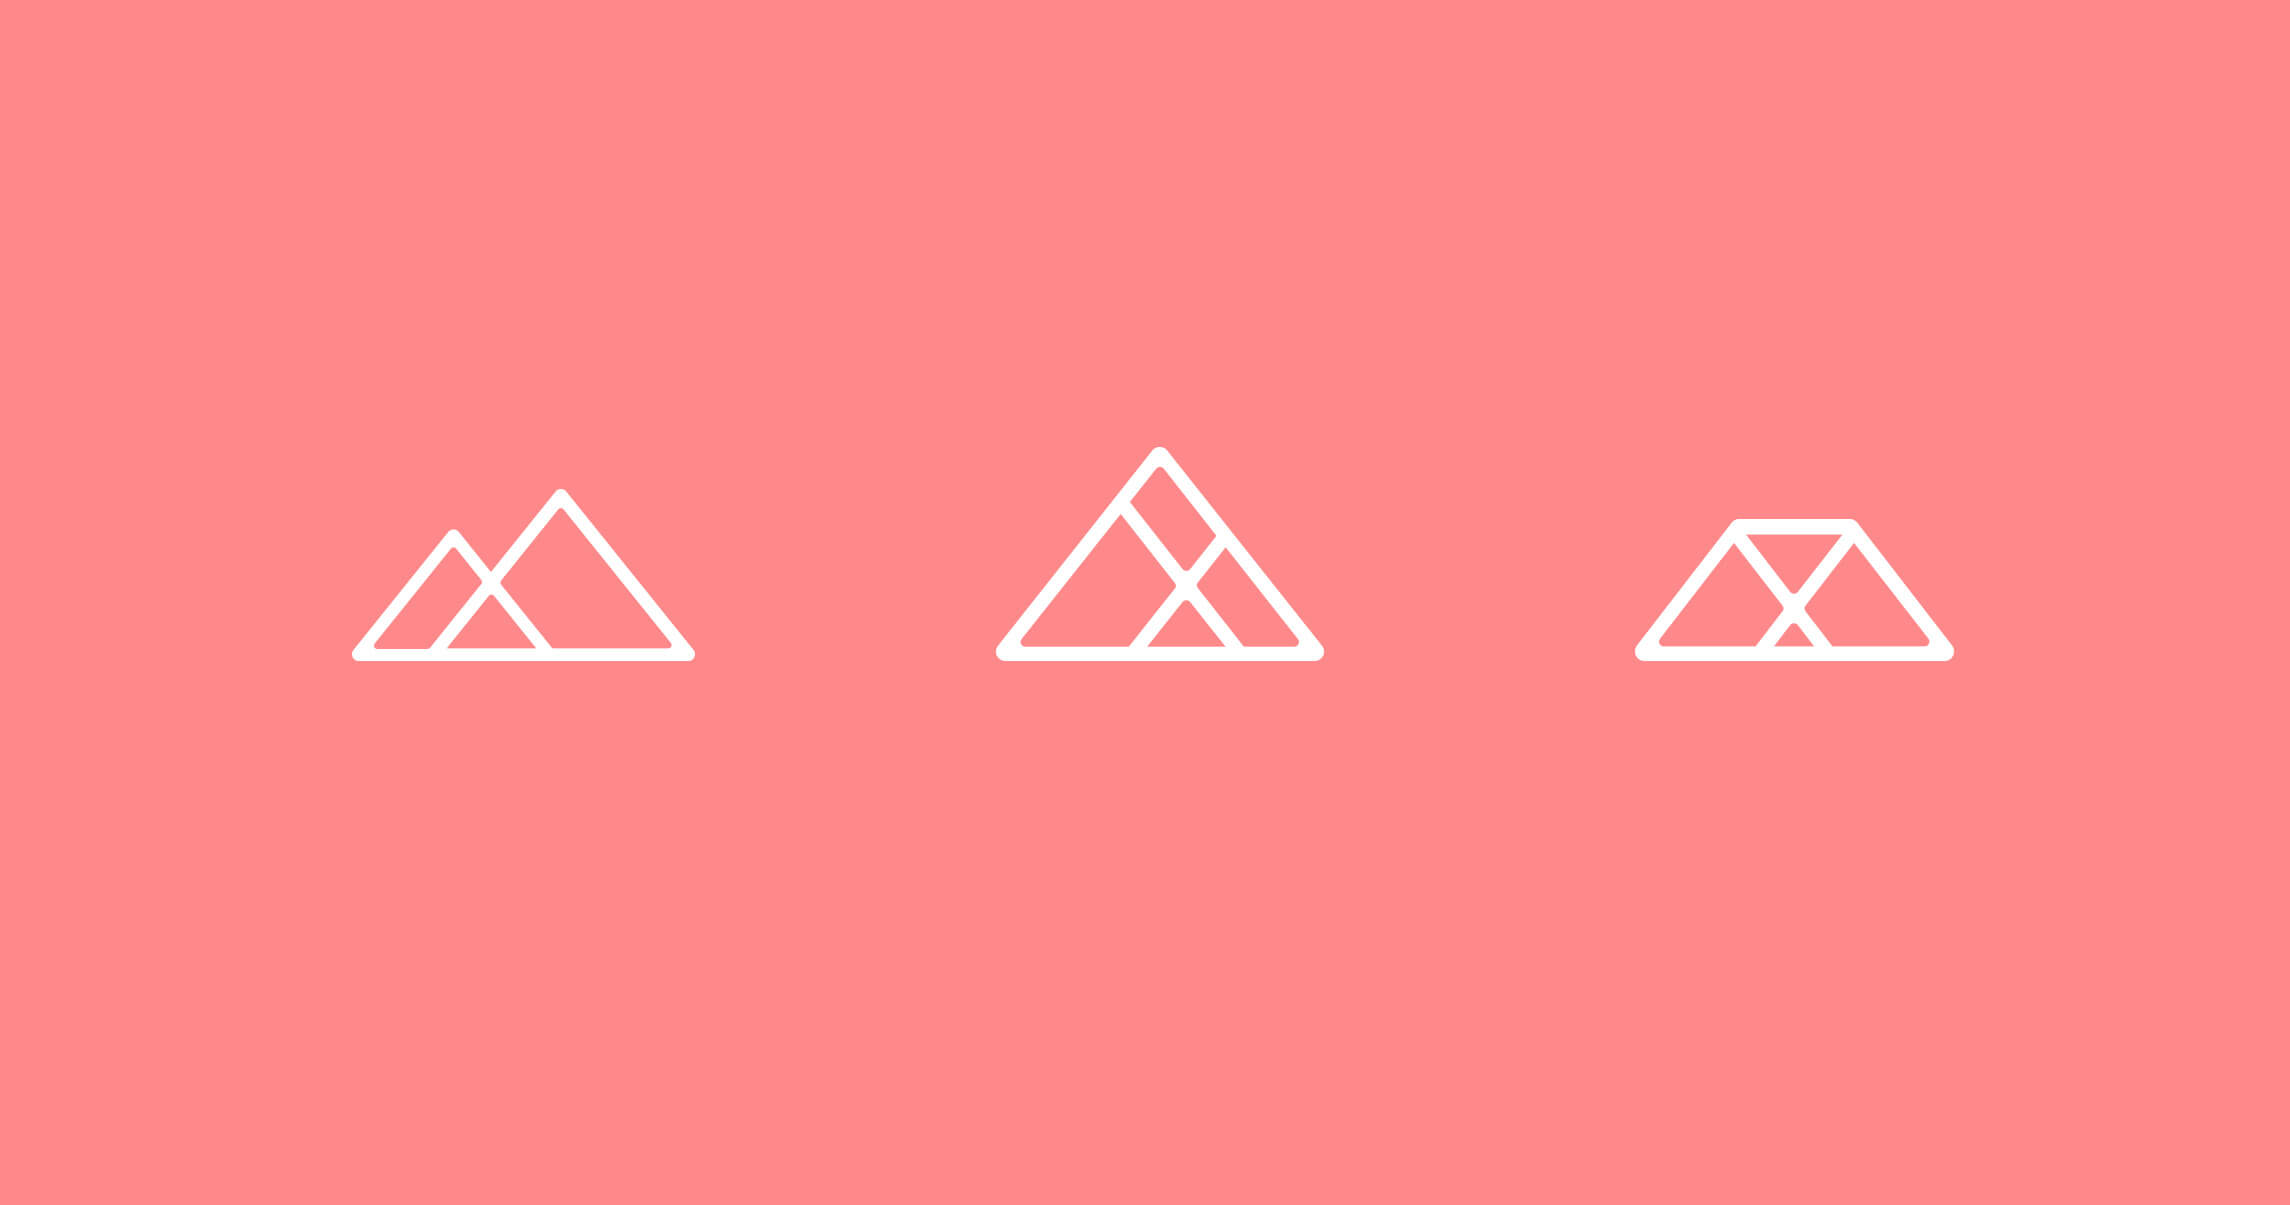 Abstract logos based on the three mountains of Abergavenny